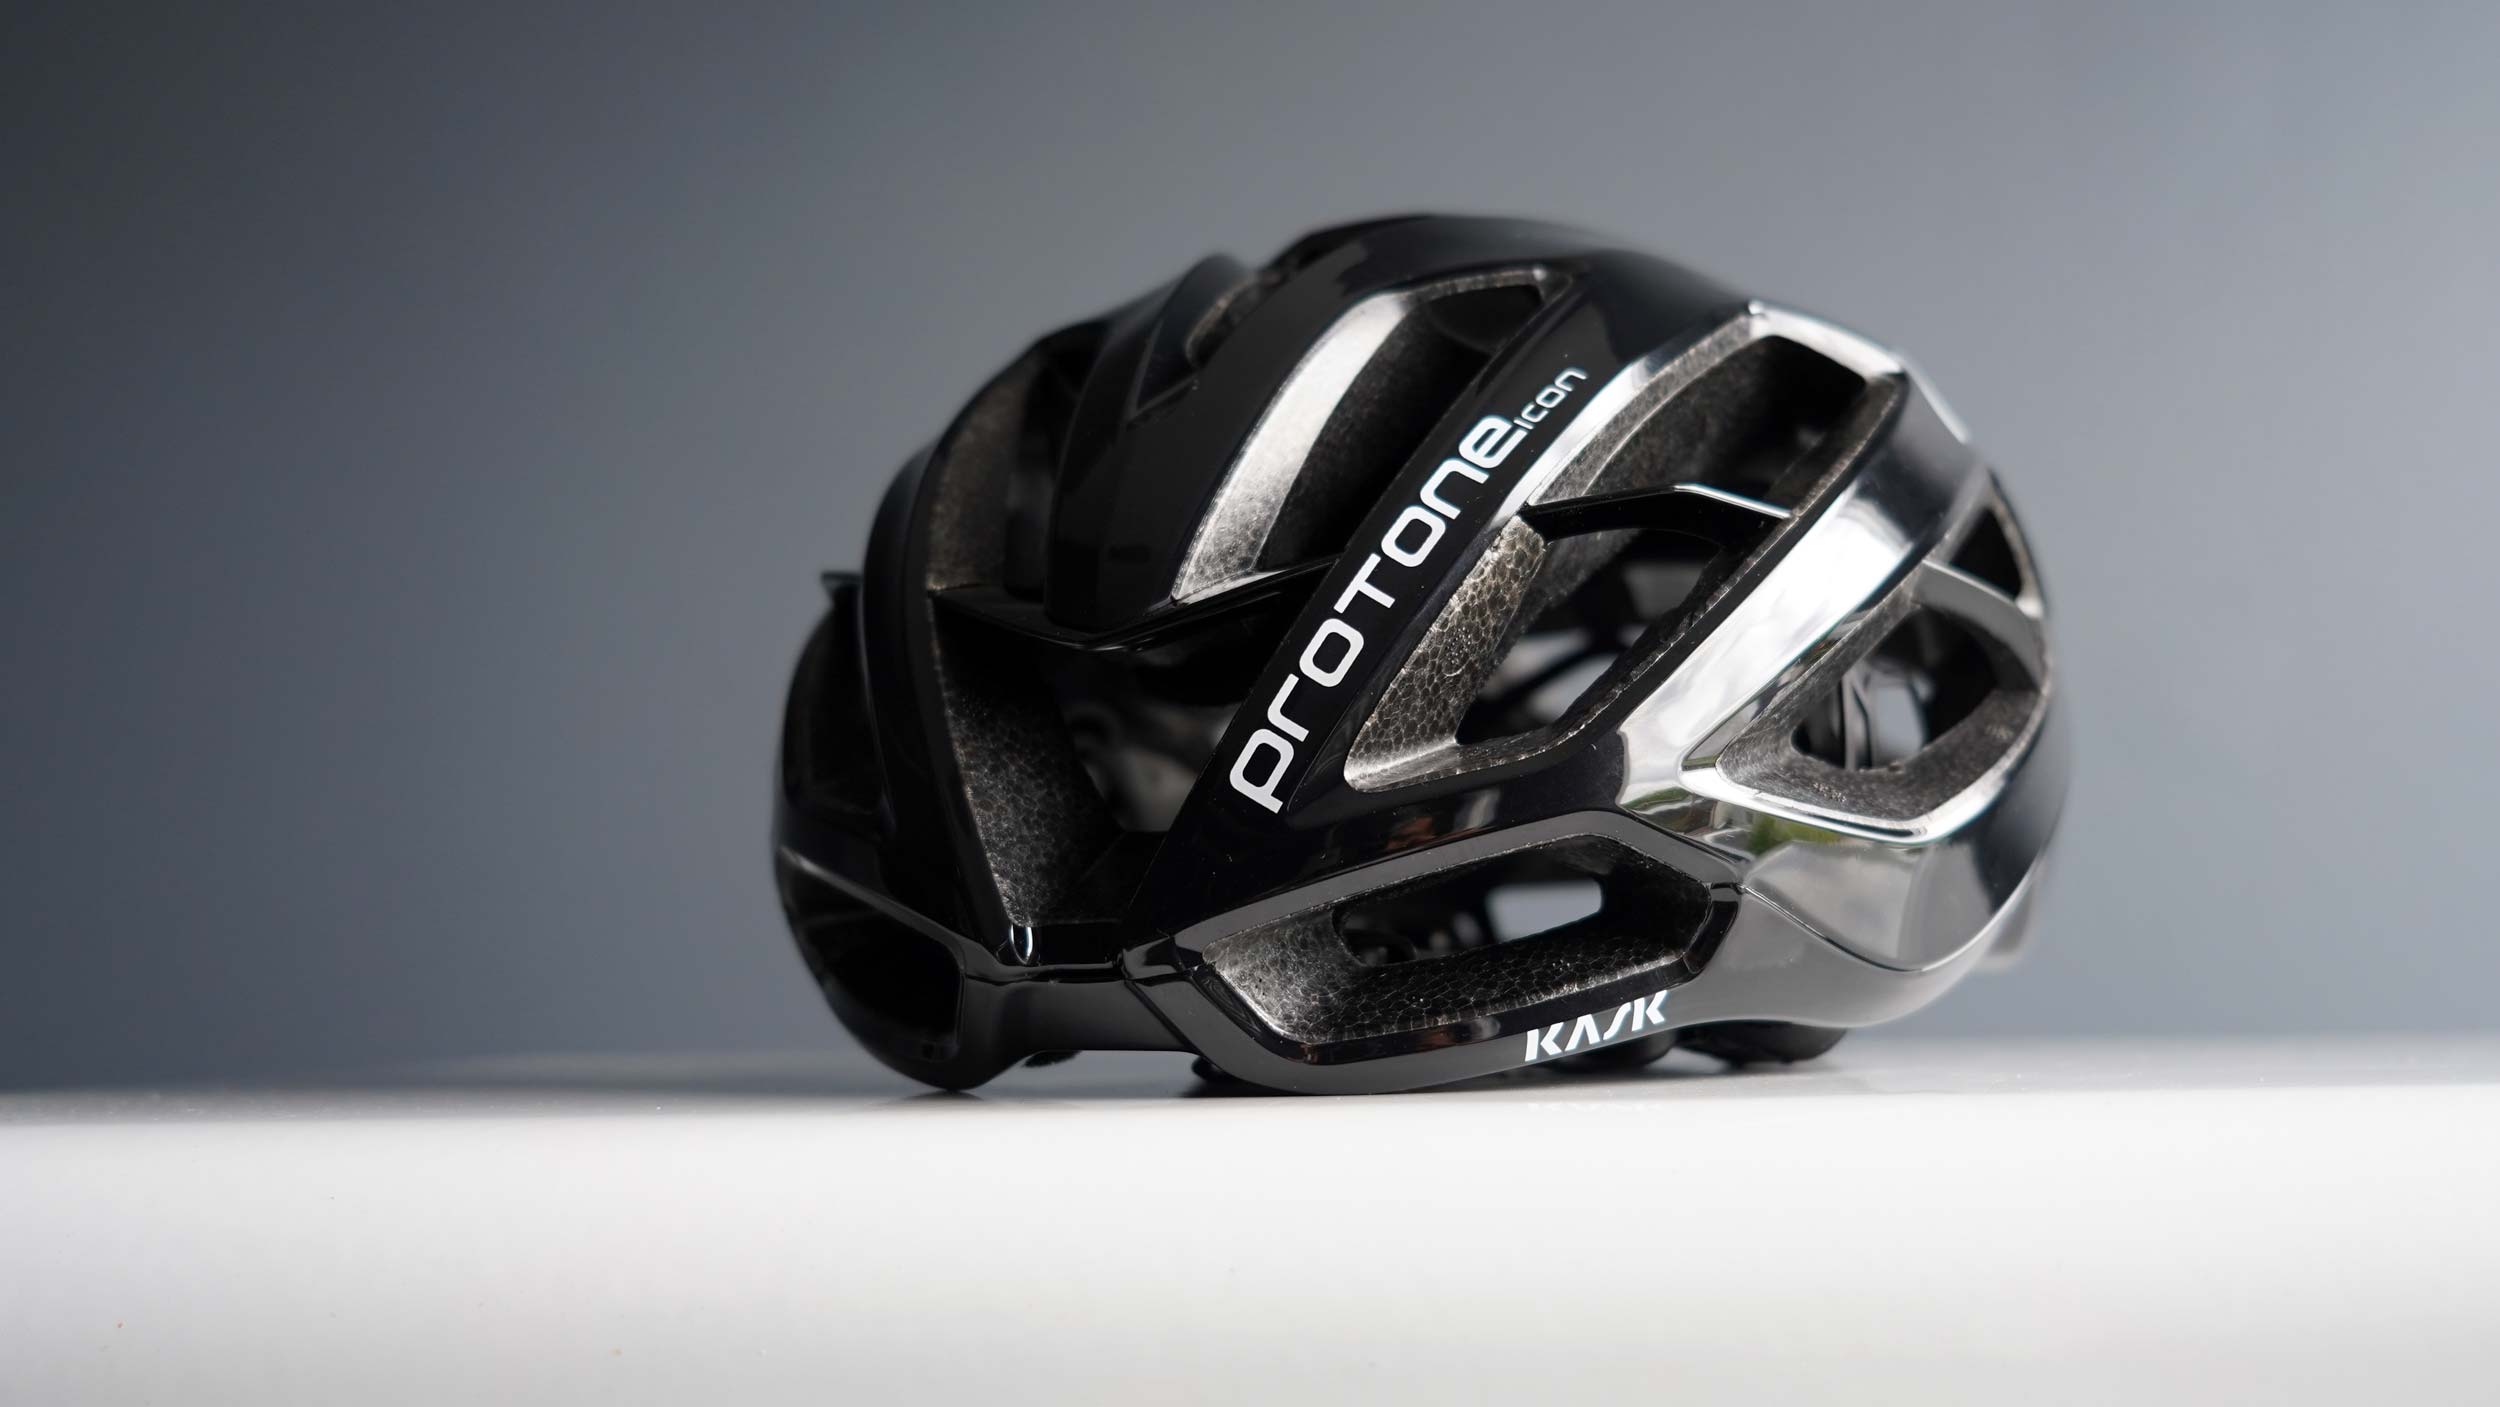 Kask Protone Icon helmet review (part 1) – unboxing, fitting, weigh-in + comparison - Ride